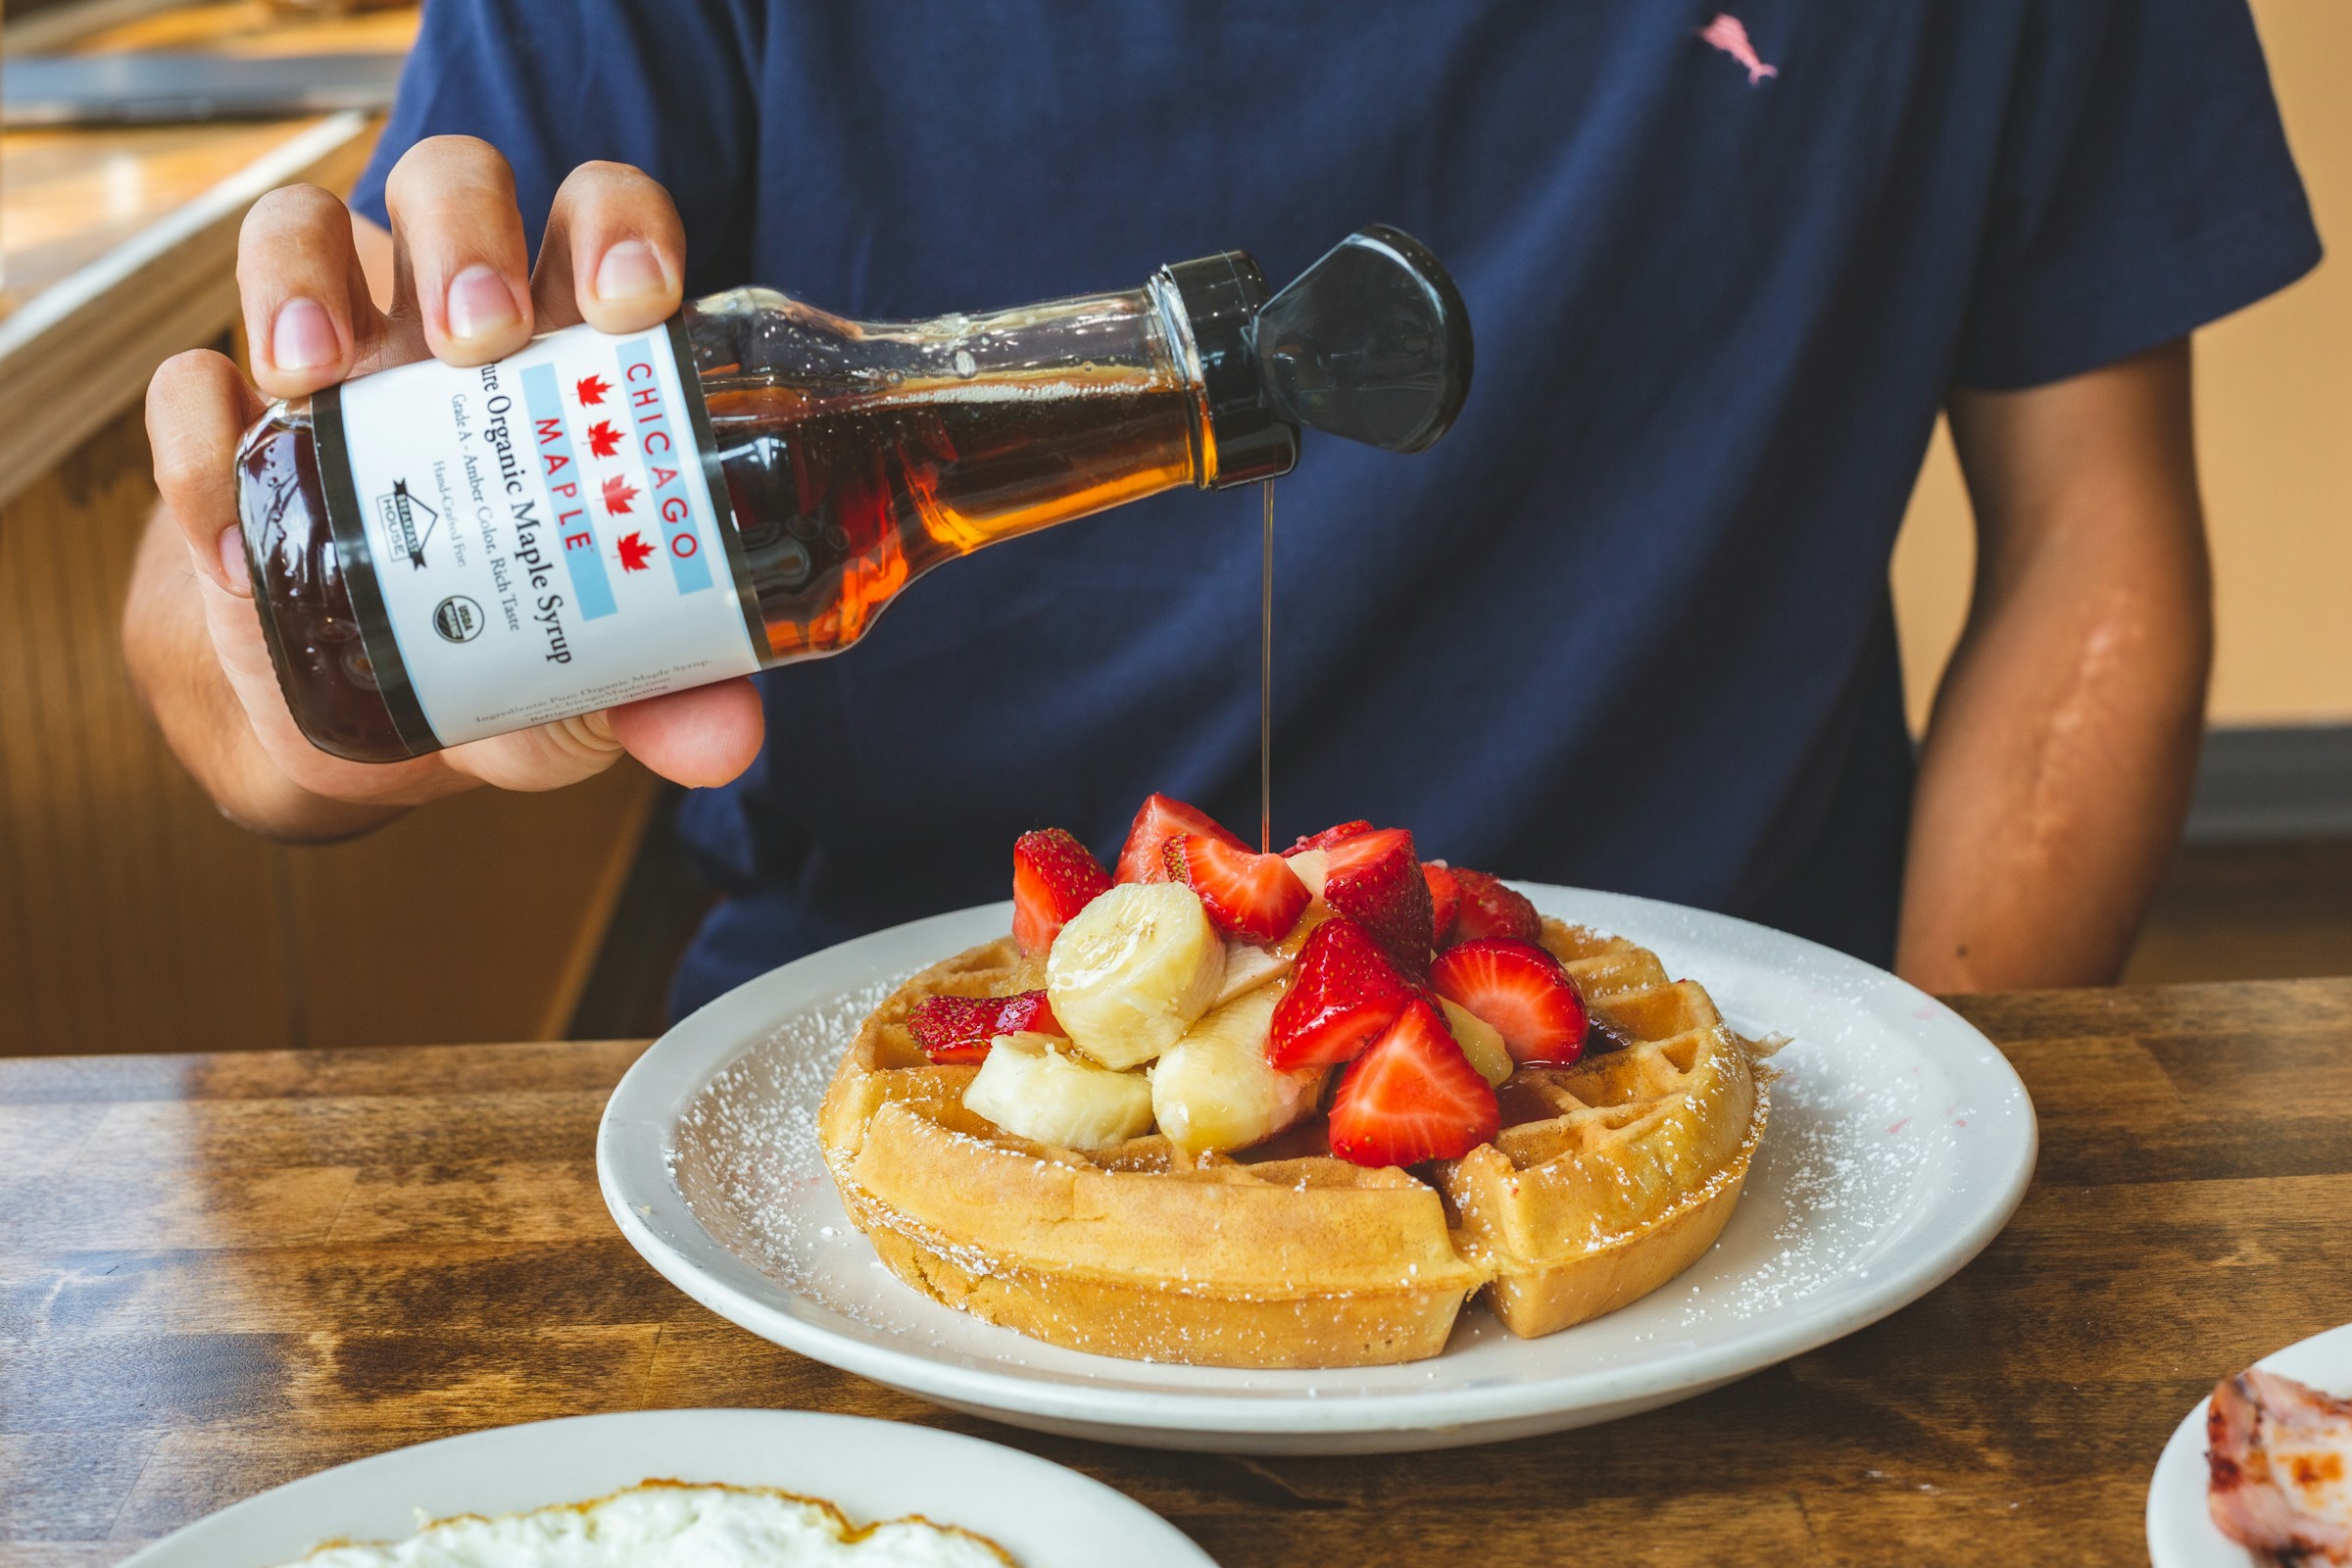 A person pouring syrup on waffles | Source: Unsplash